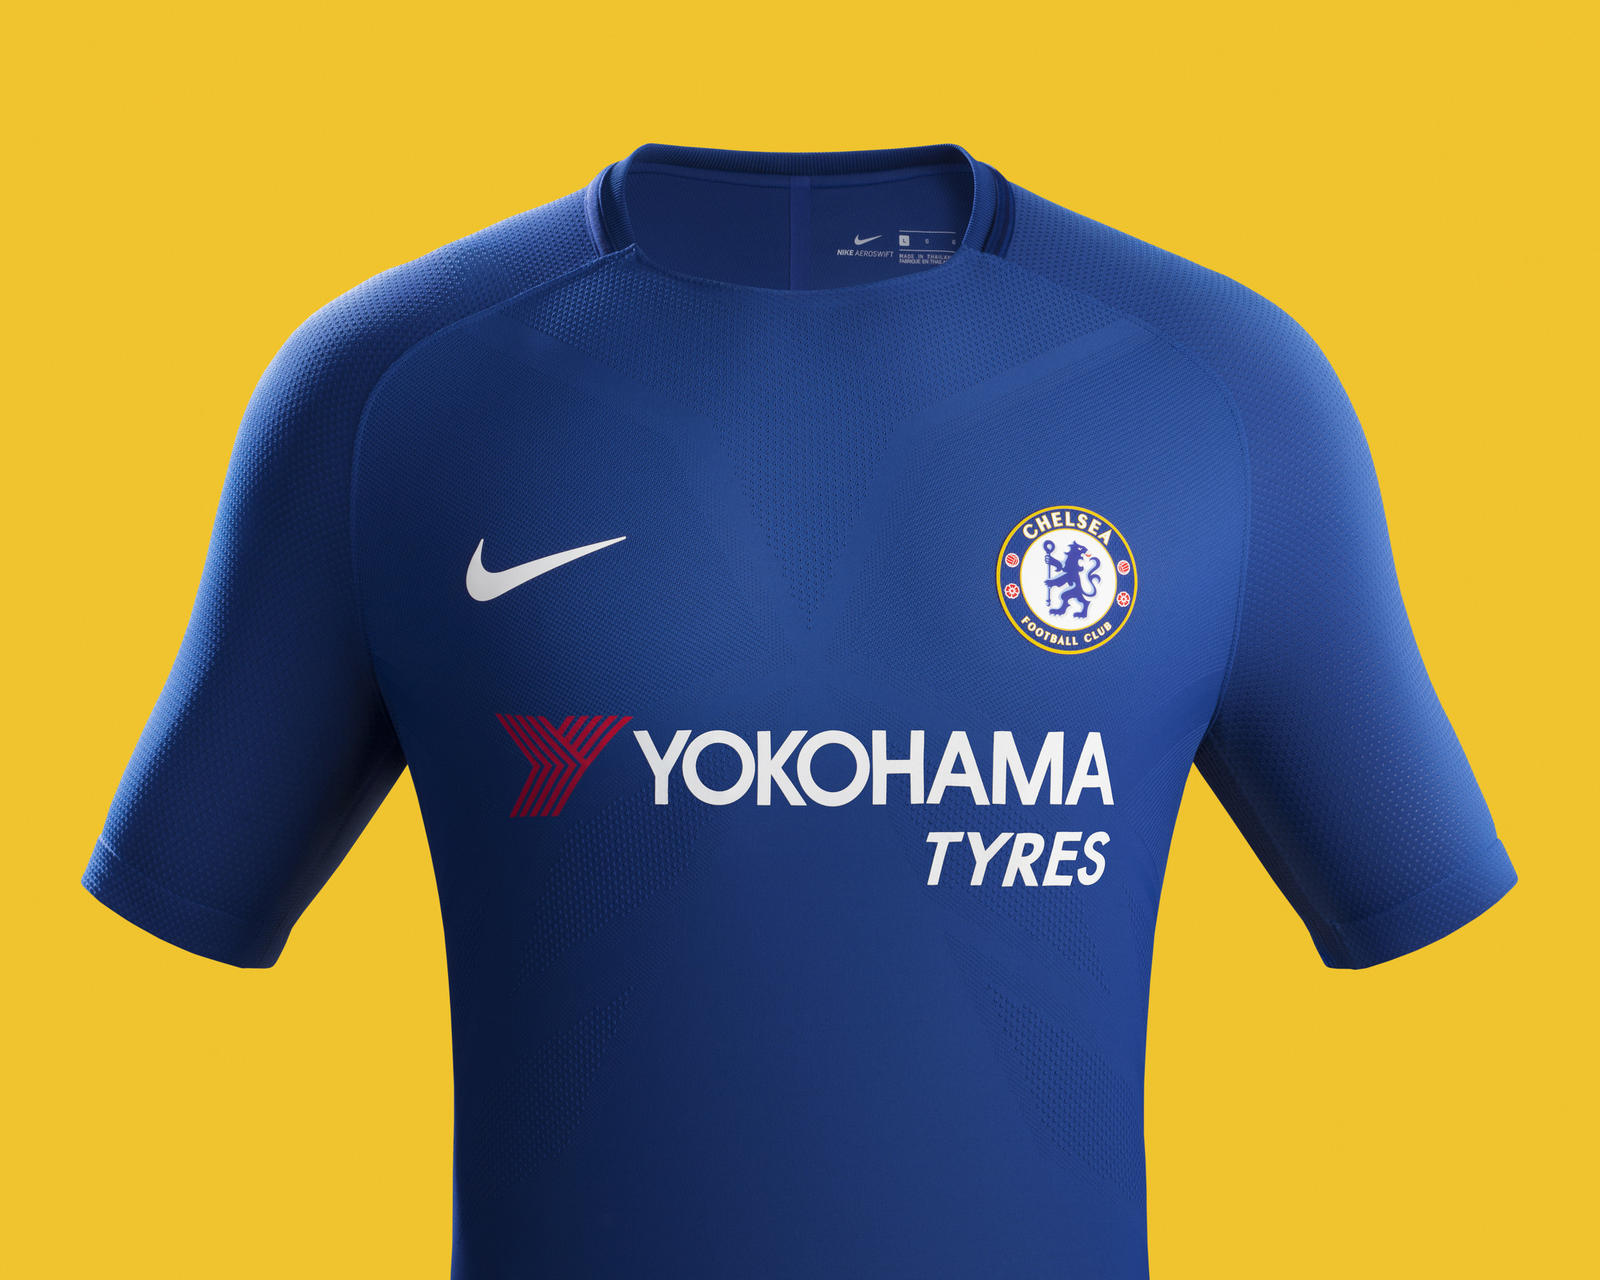 wimper voorspelling Zonnig Chelsea thuisshirt 2017-2018 - Voetbalshirts.com